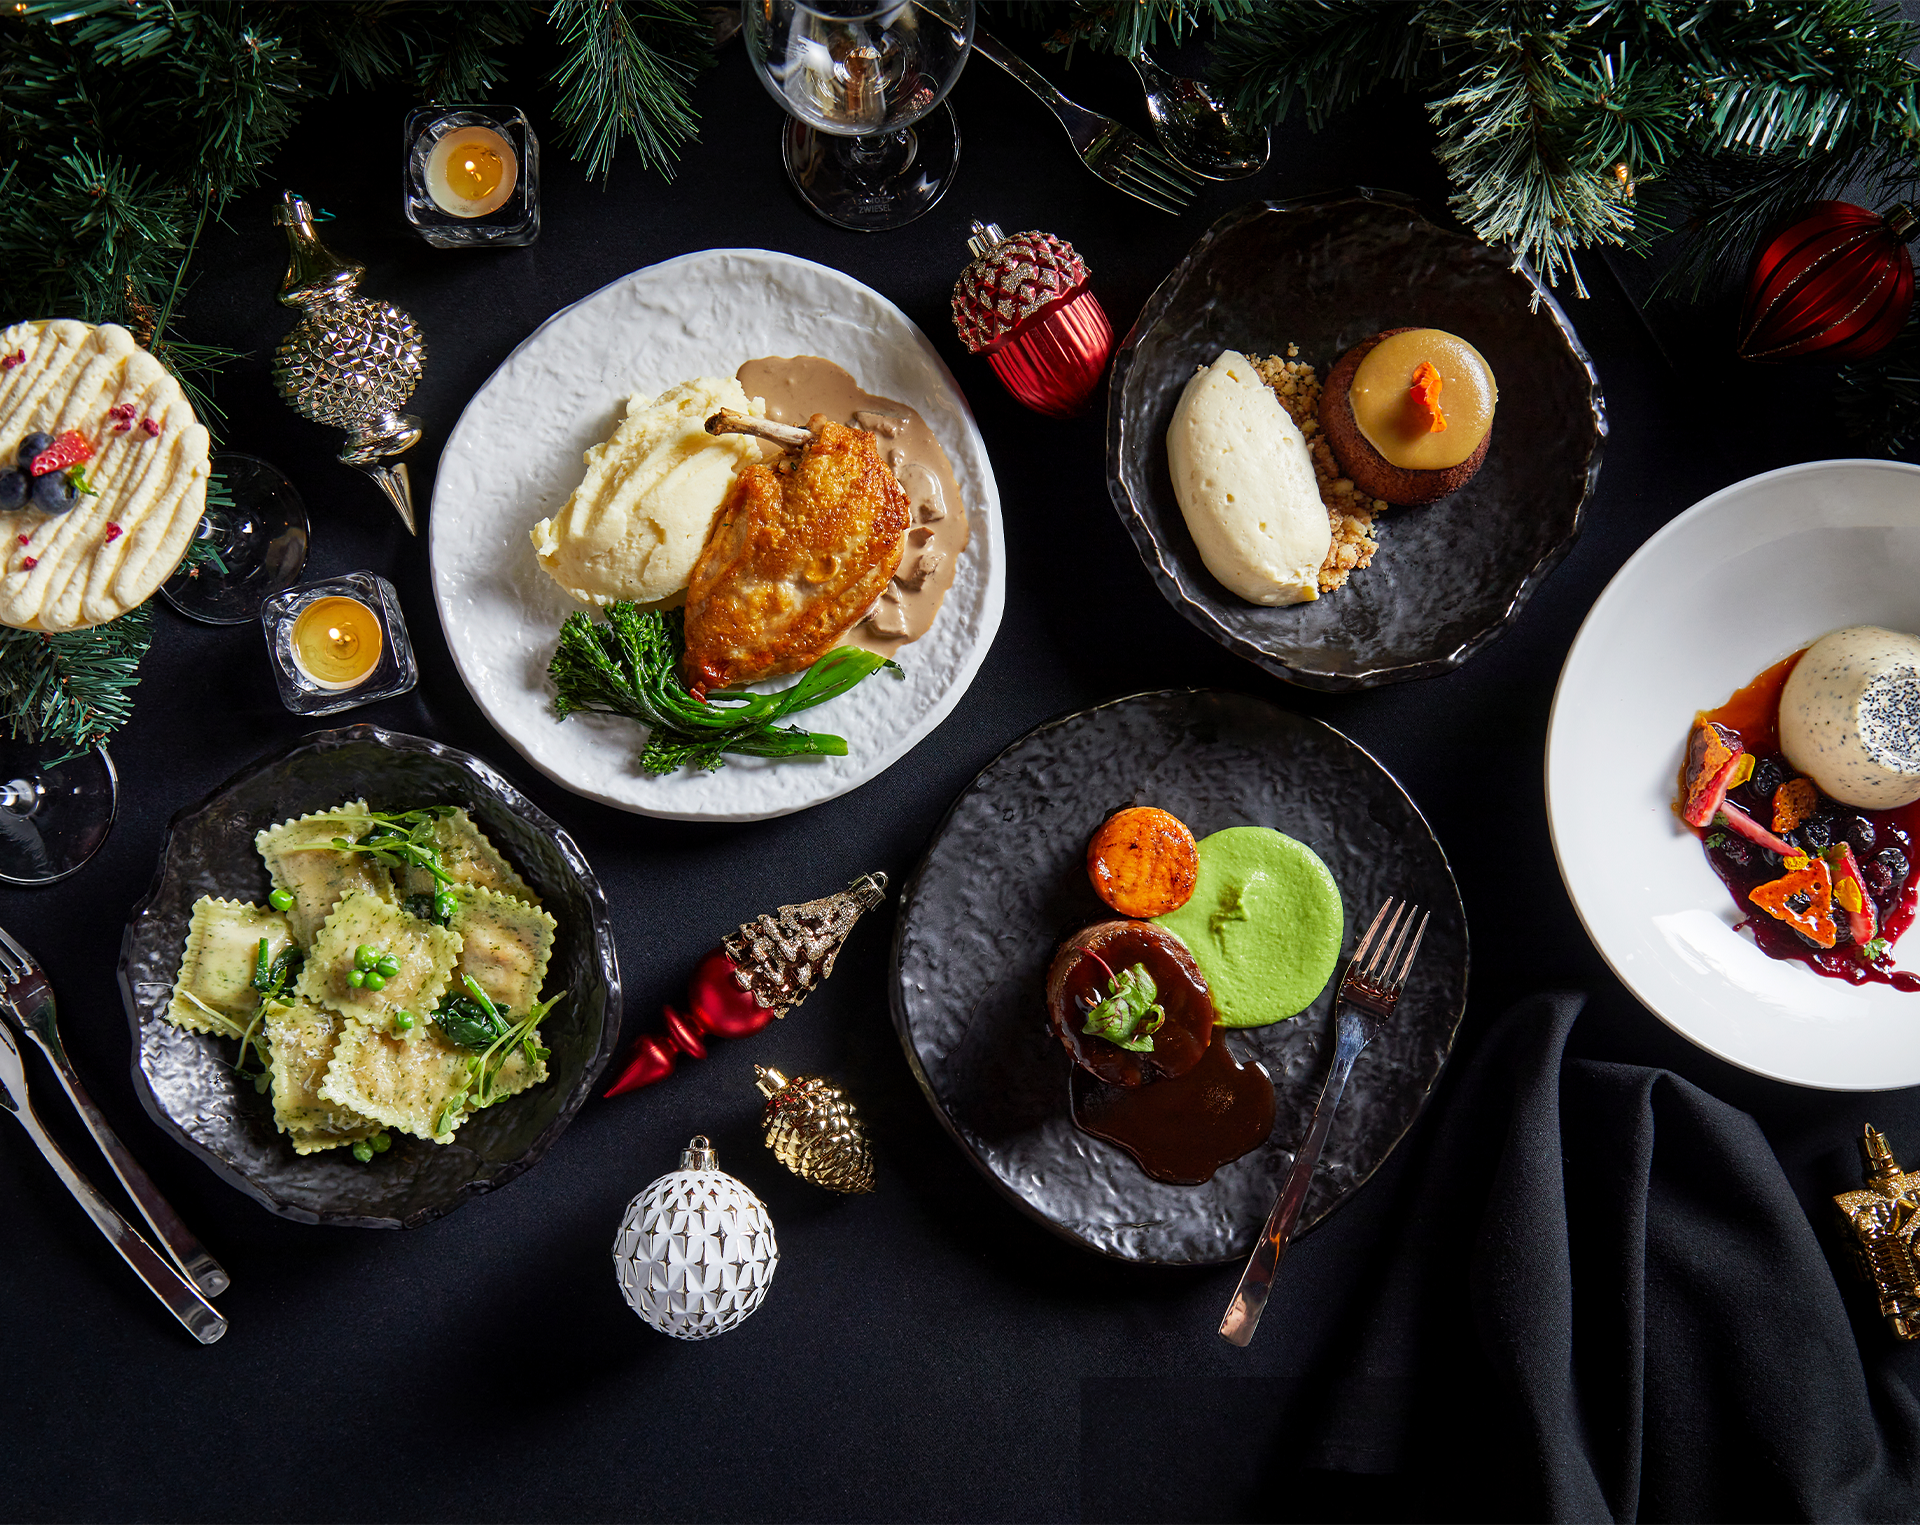 Discover HostCo's Fresh Christmas Menu for Holiday Parties, Sit-Down Dinners, Buffets, Canapés, Grazing Tables, Food Platters, and Office Deliveries